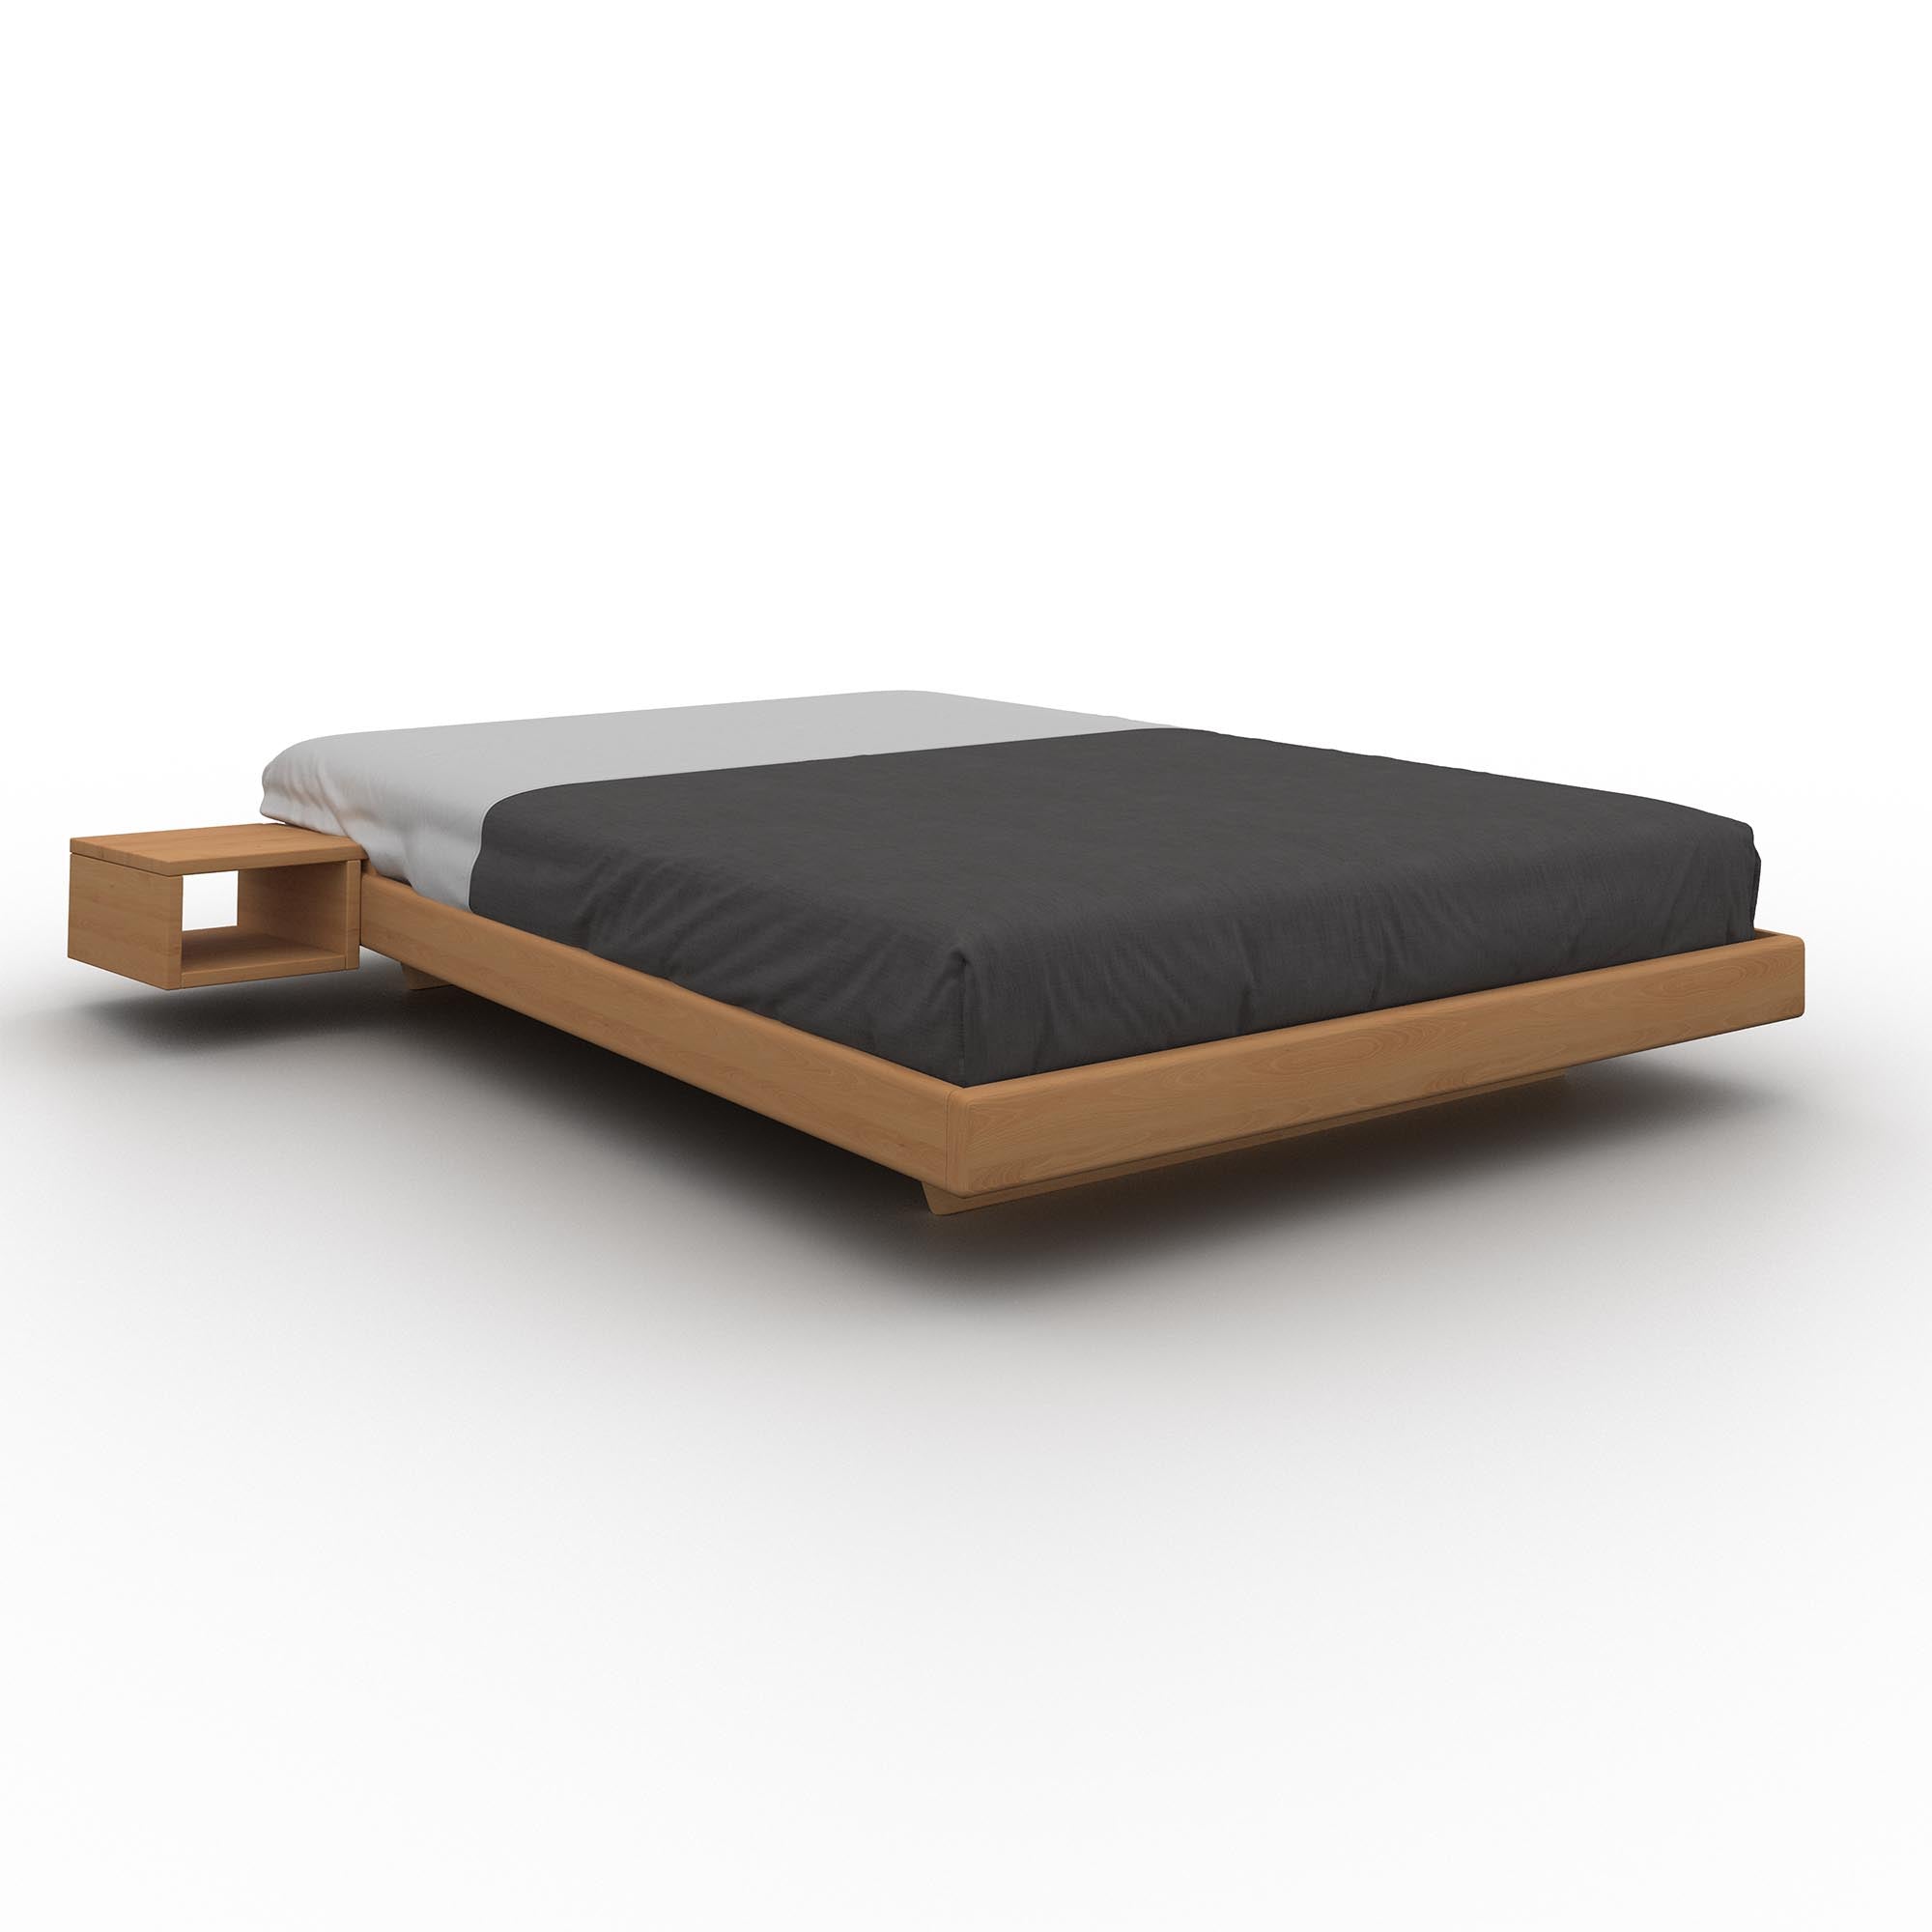 CARRE Double Bed, Beech Wood-caramel frame with table